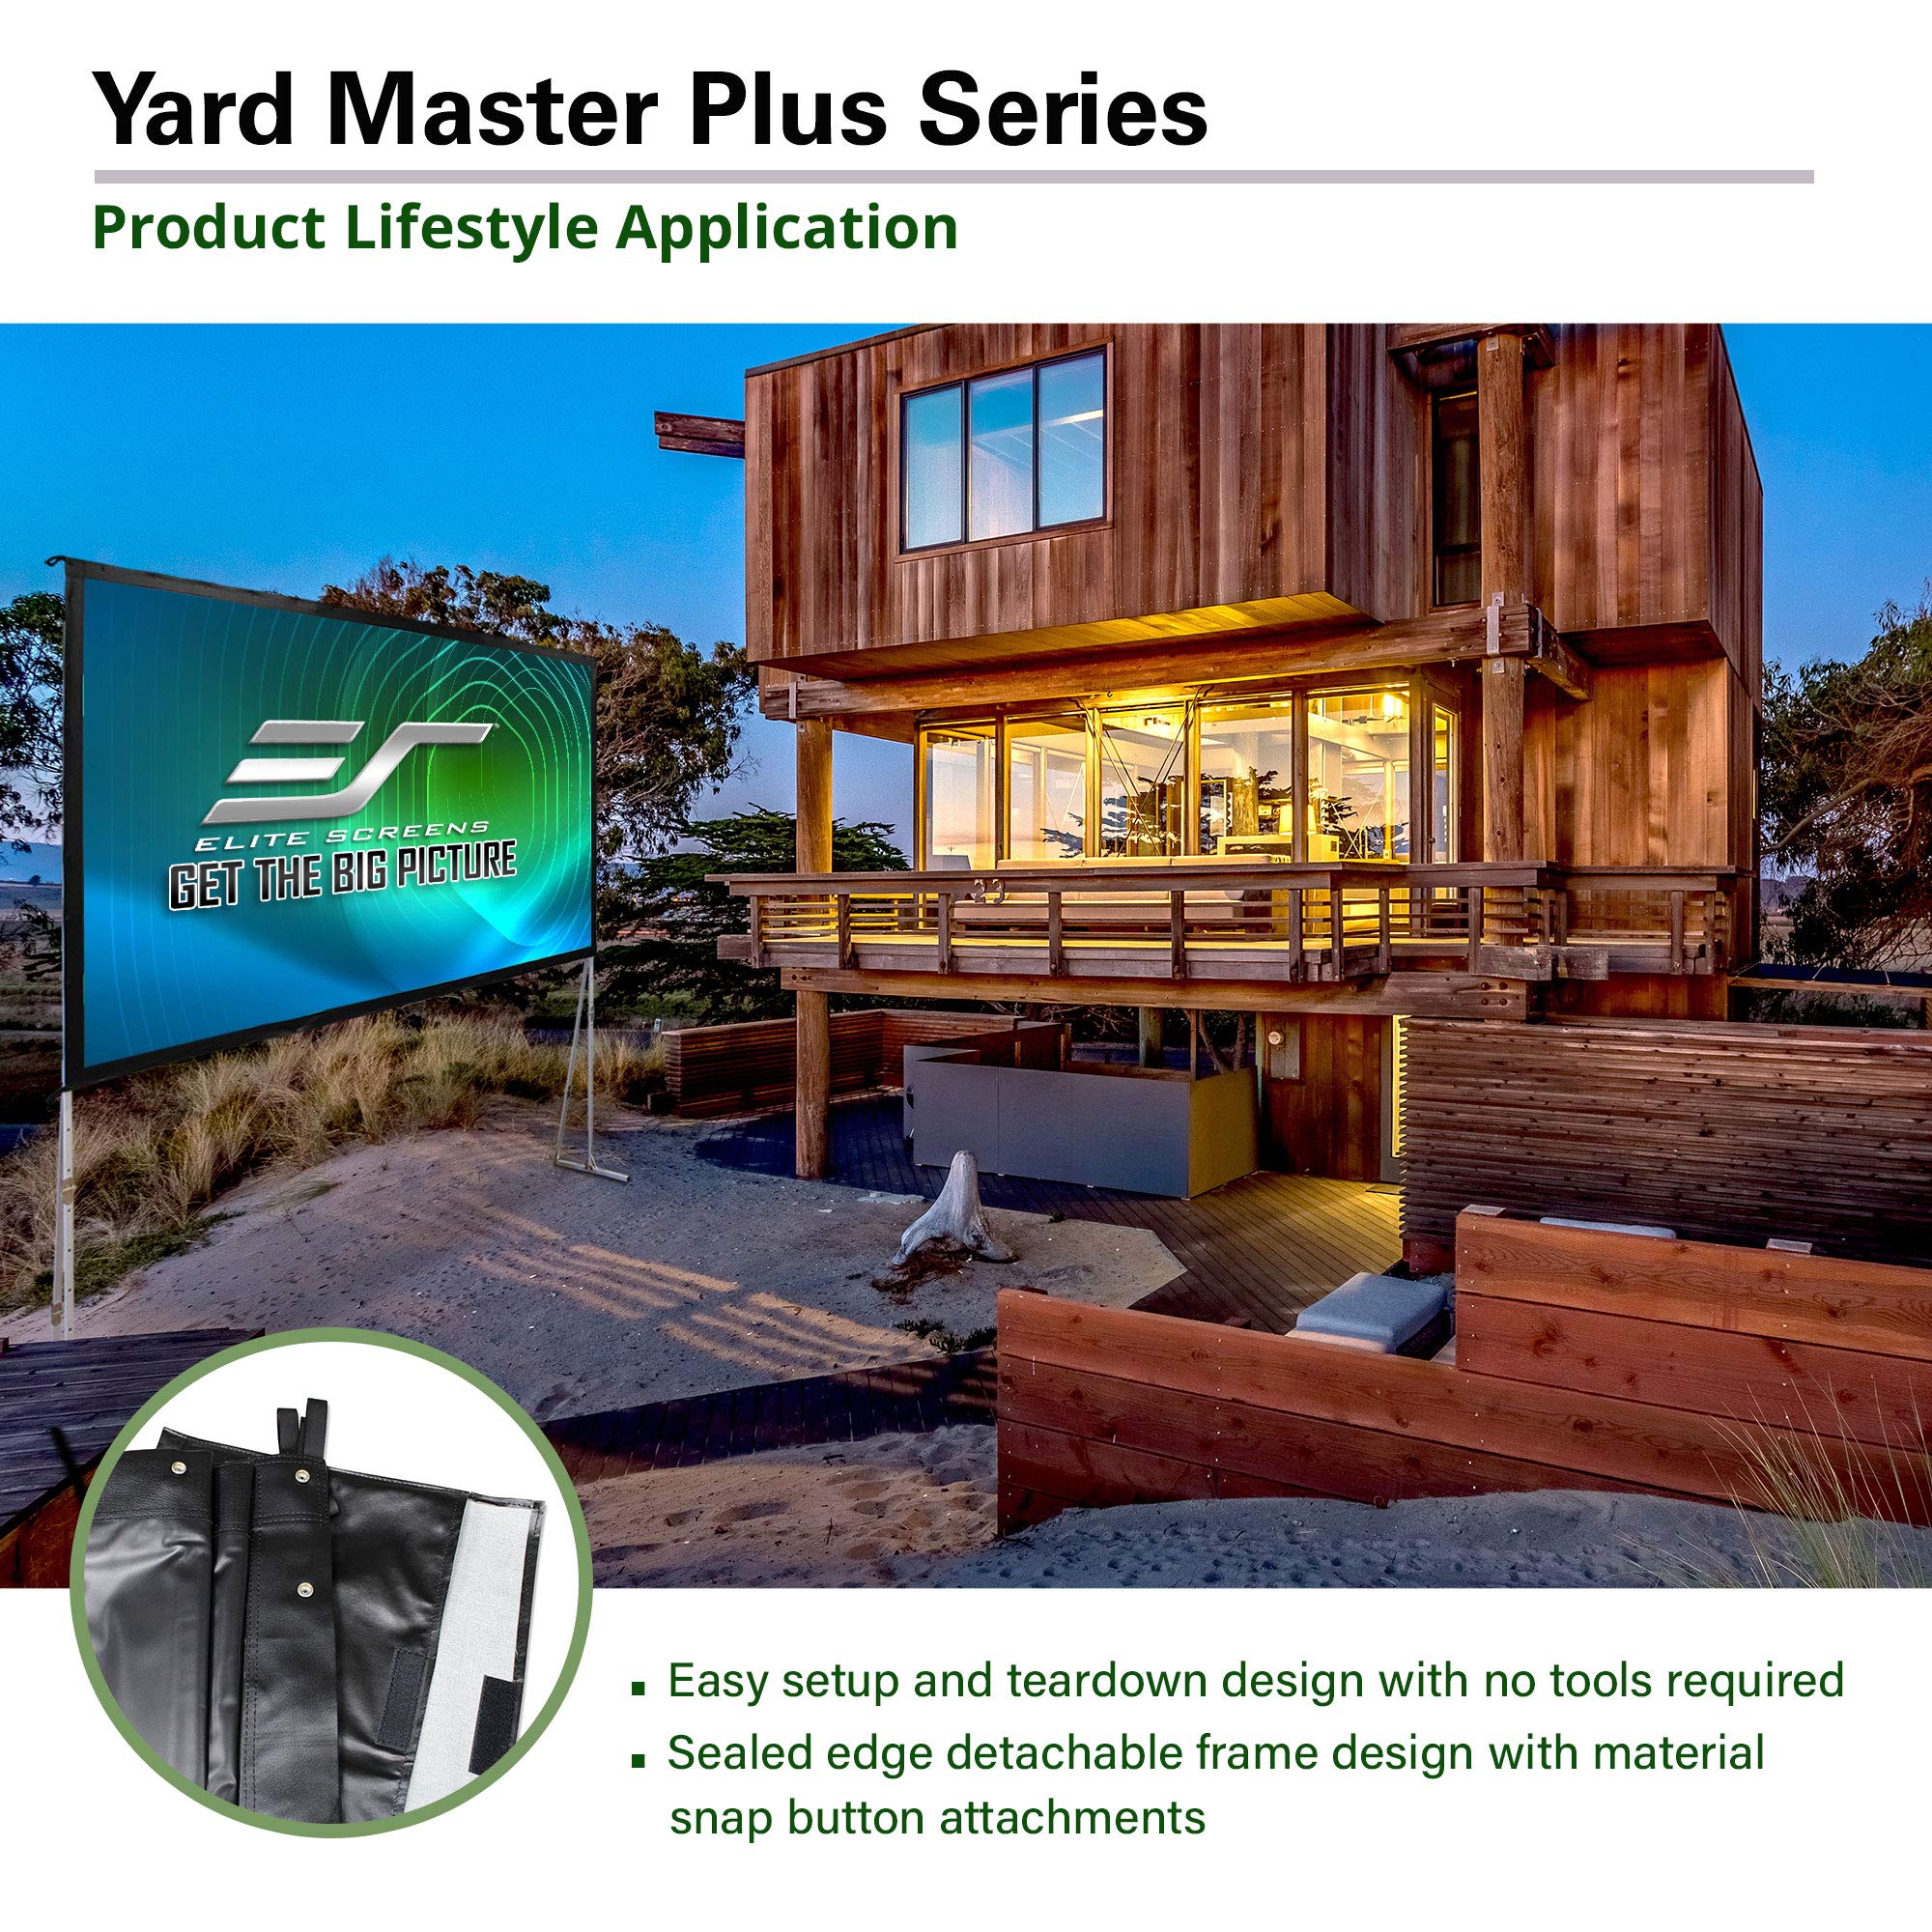 Elite Screens Yard Master Plus, 100-INCH 16:9, 8K 4K Ultra HD 3D Ready Indoor/Outdoor Portable Home Movie Theater Projector Screen, Front Projection - OMS100H2PLUS | US Based Company 2-YEAR WARRANTY